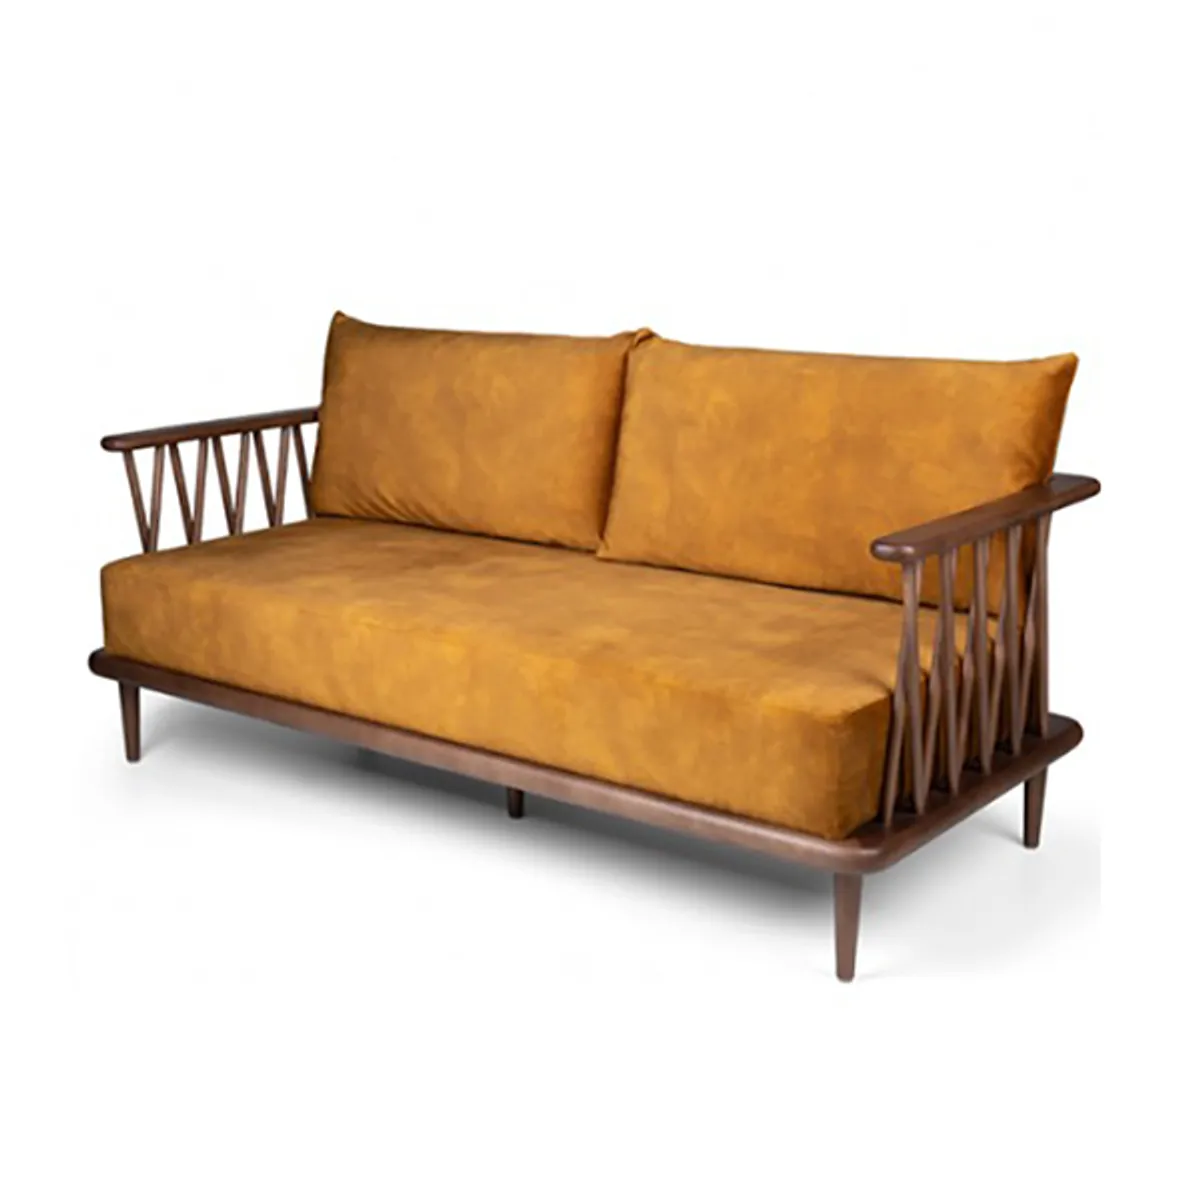 Nature Sofa Wooden Framed Furniture By Insideoutcontracts